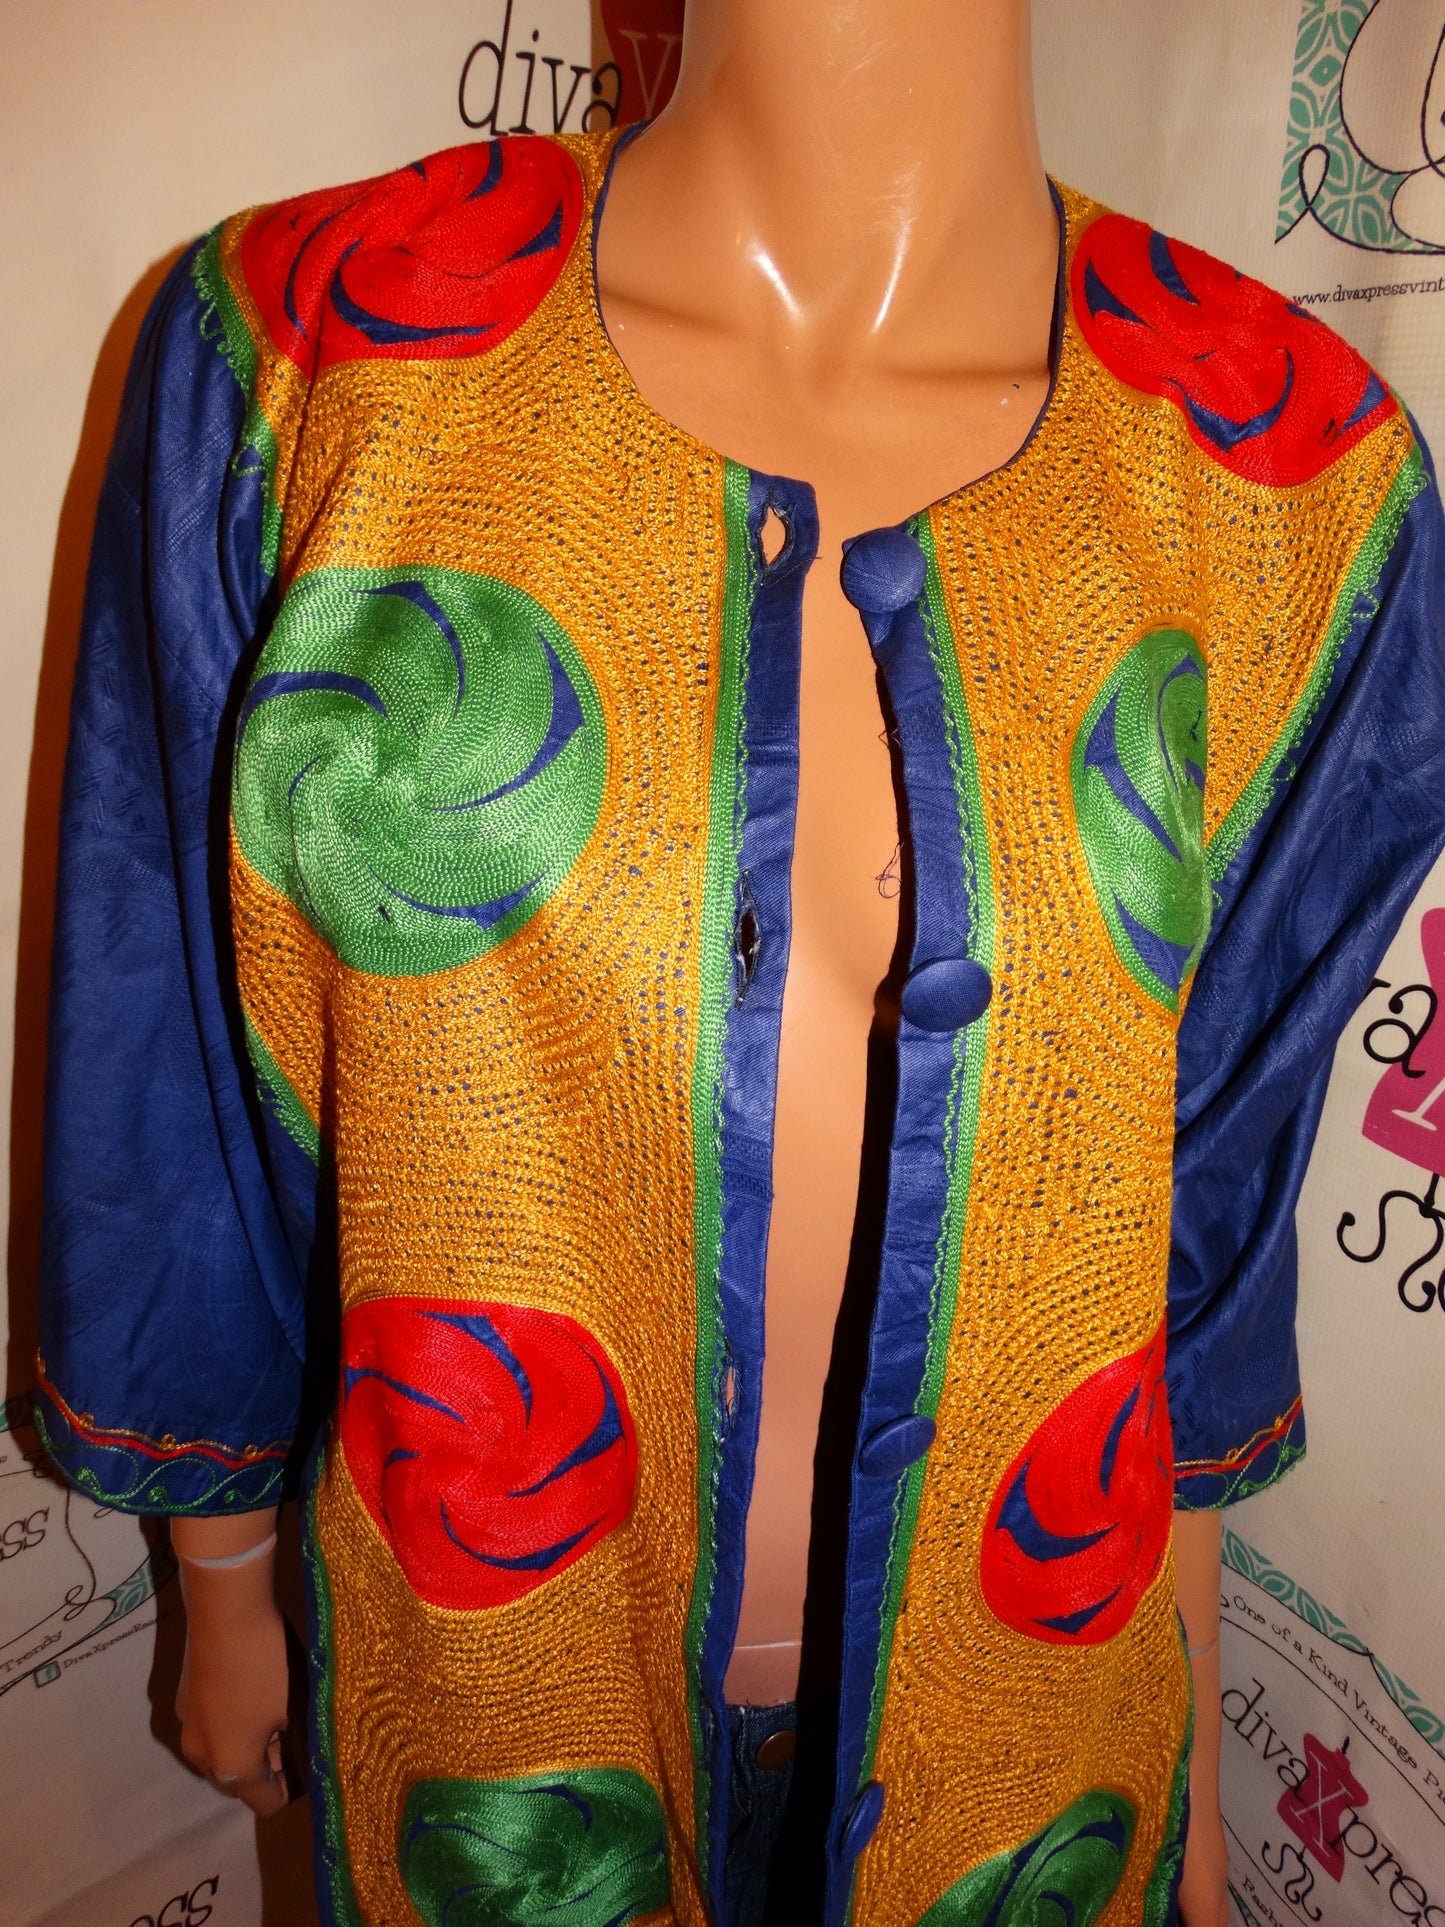 Vintage Purple Colorful Top/Throw Size 3x